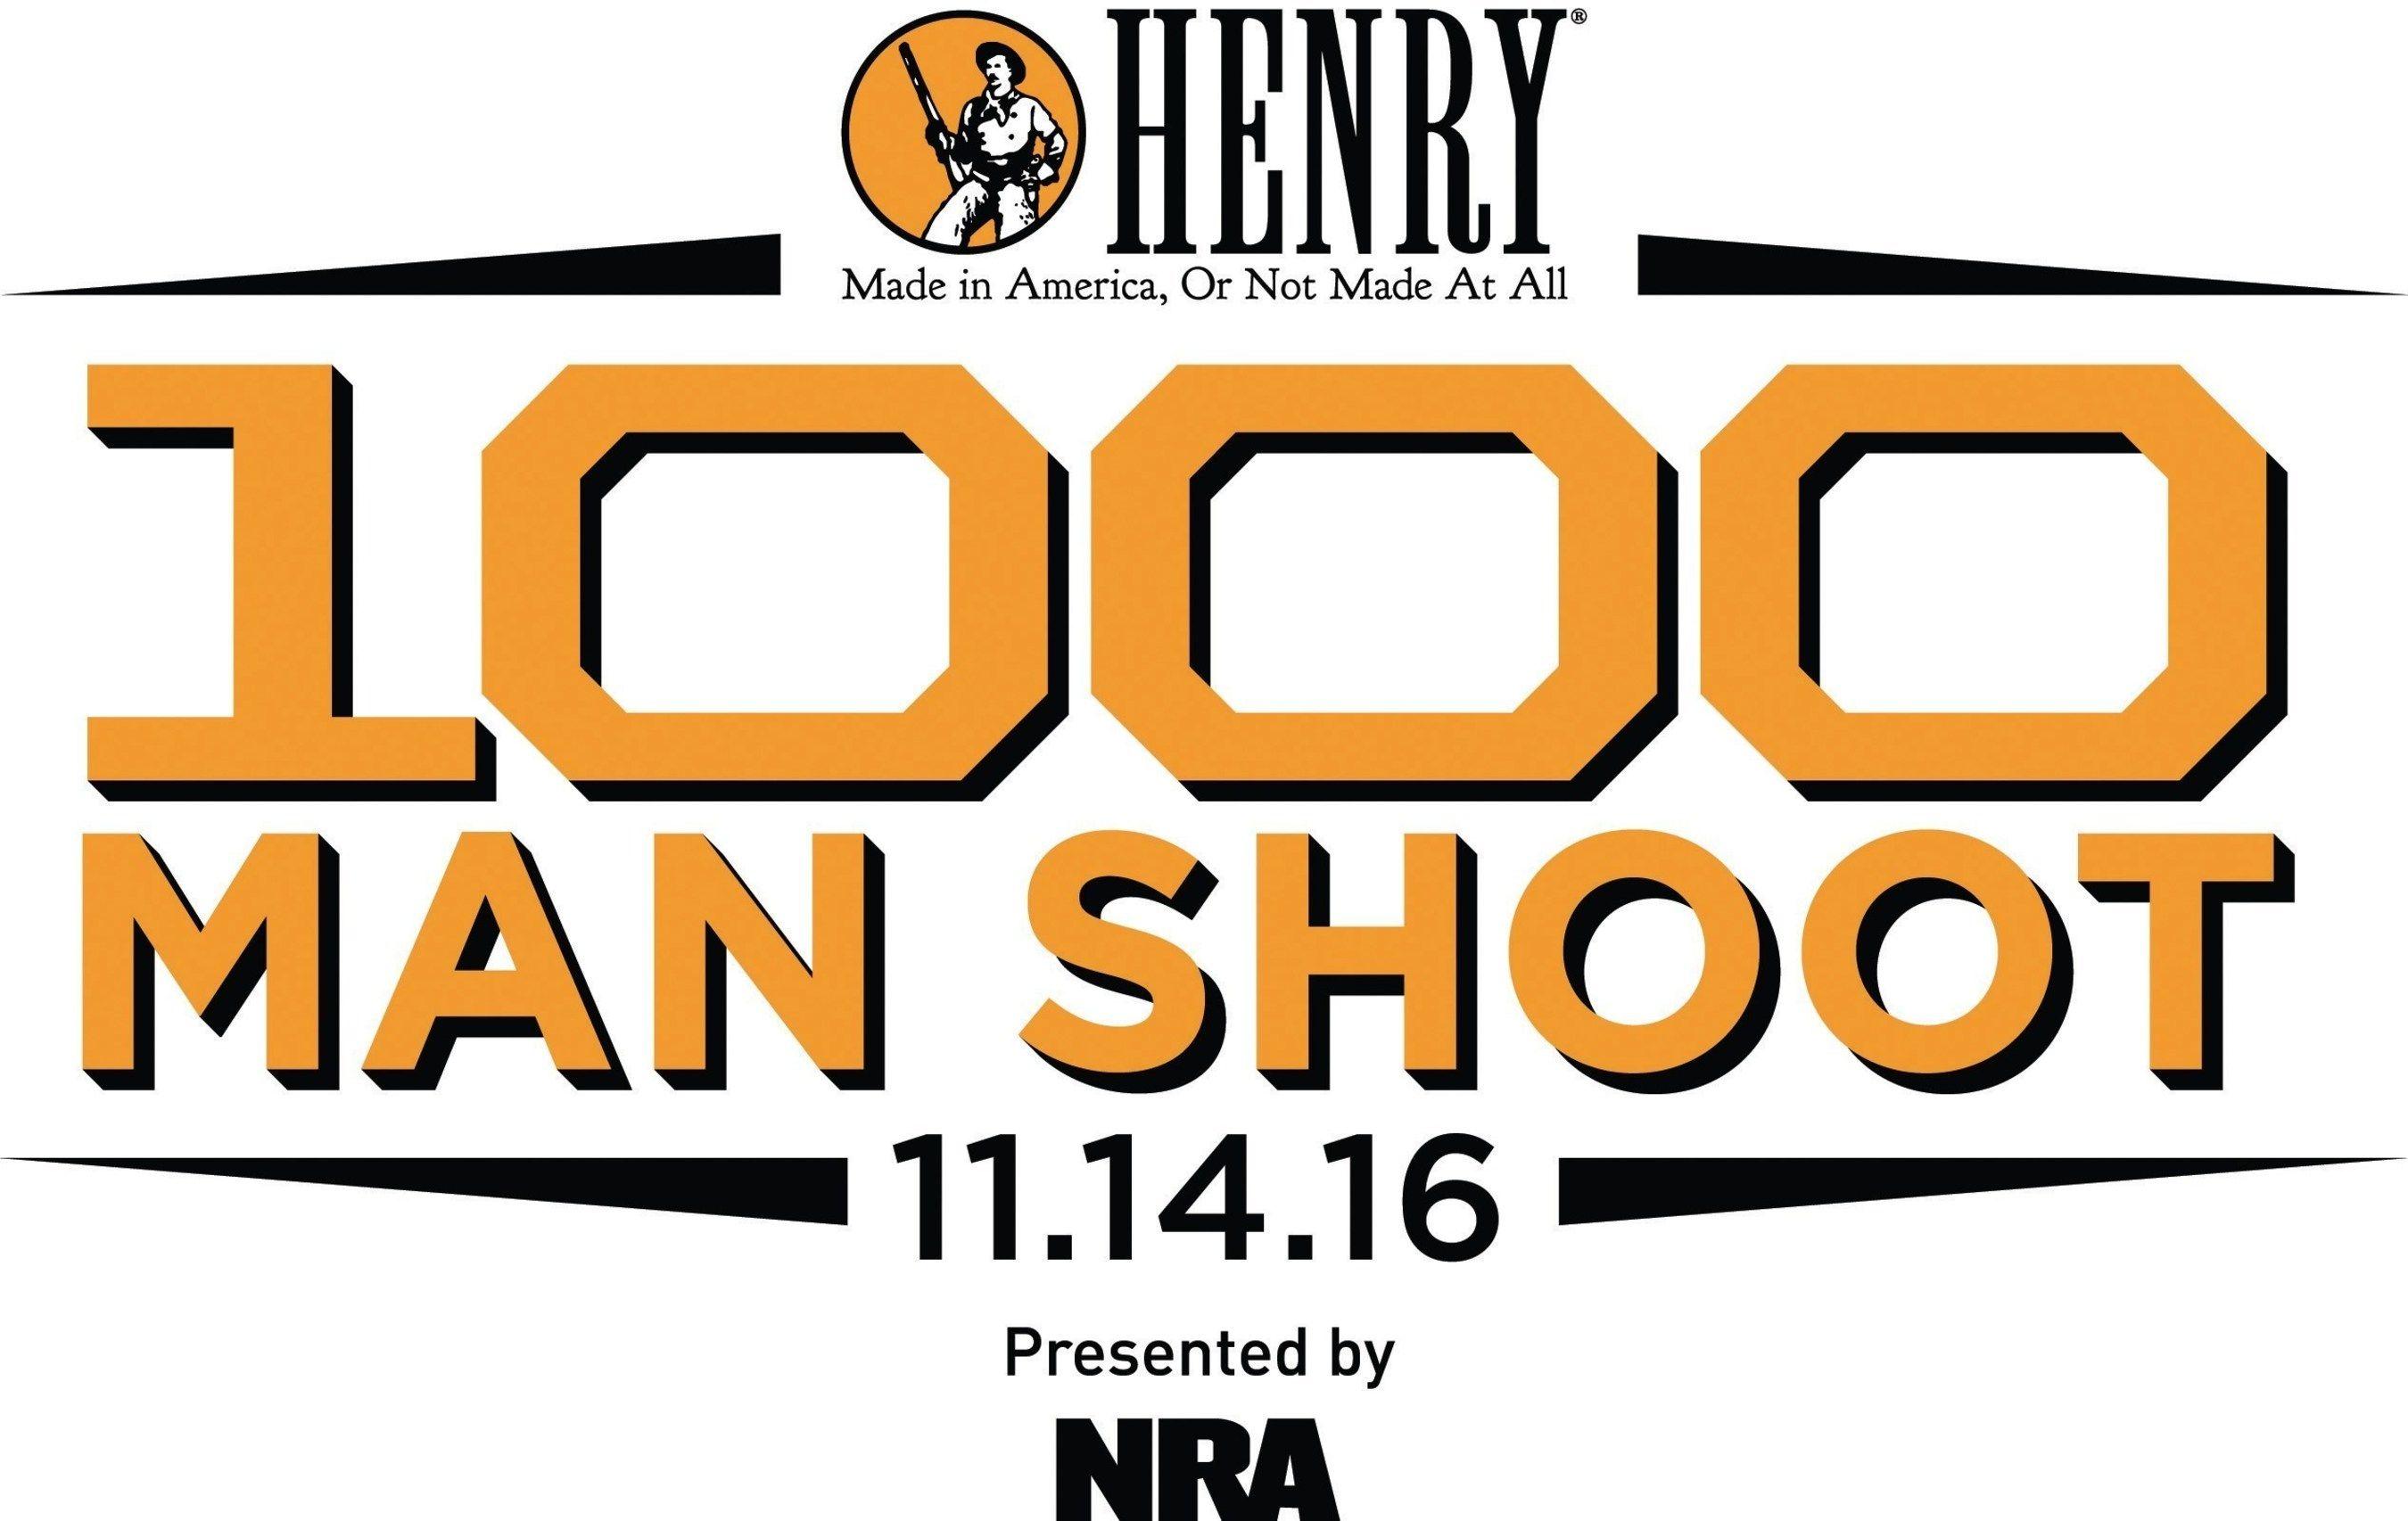 Henry Arms Logo - The Henry 1000 Man Shoot To Benefit The NRA